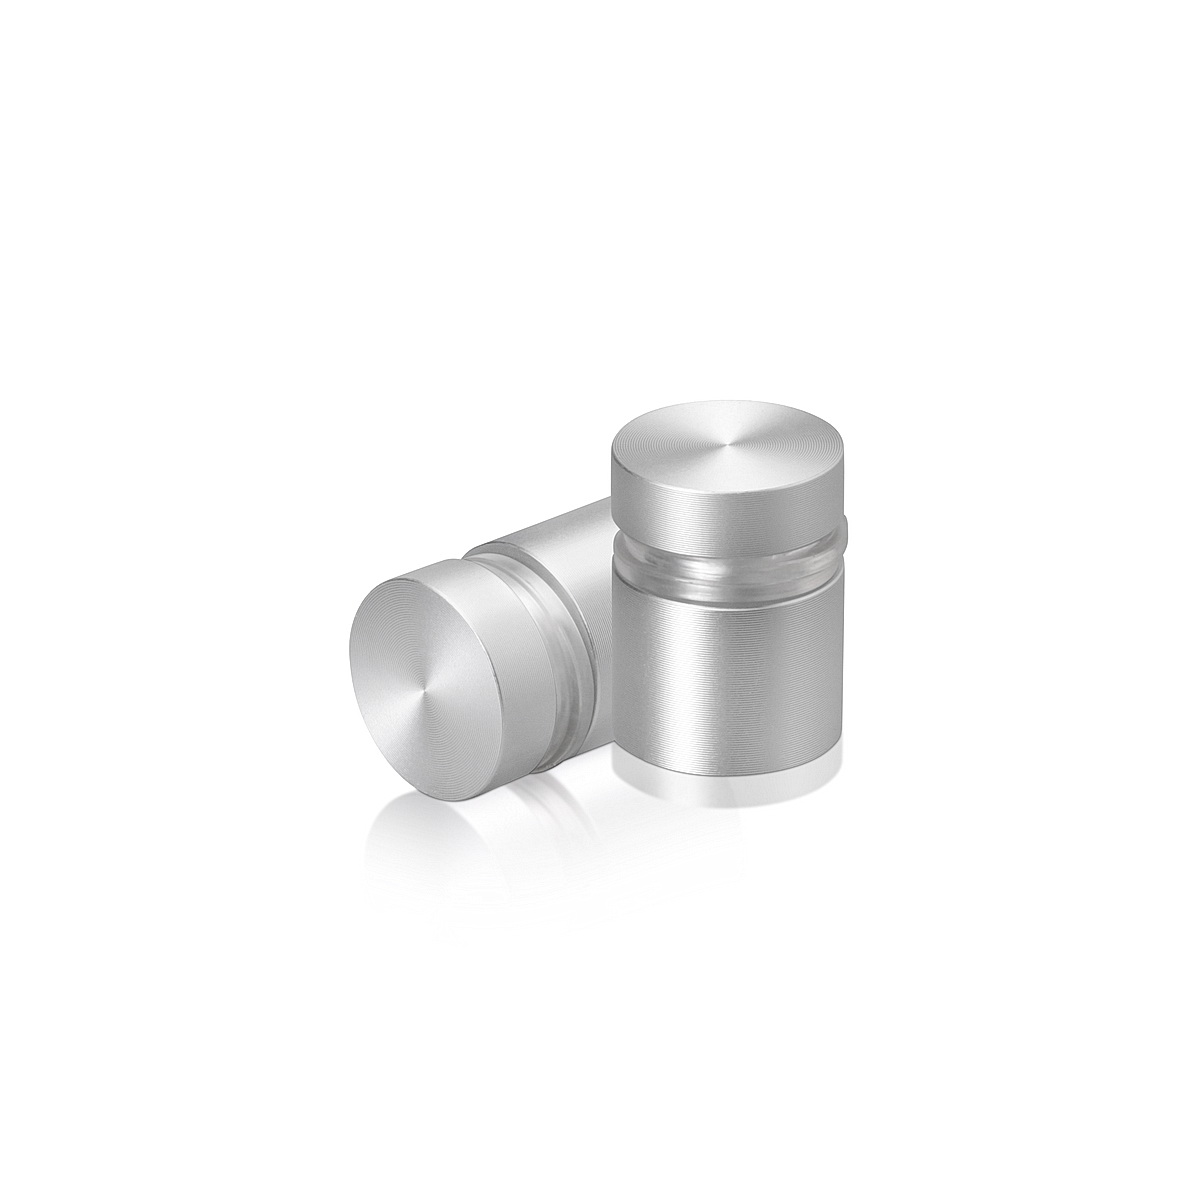 5/8'' Diameter X 1/2'' Barrel Length, Aluminum Flat Head Standoffs, Clear Anodized Finish Easy Fasten Standoff (For Inside / Outside use) Tamper Proof Standoff [Required Material Hole Size: 7/16'']